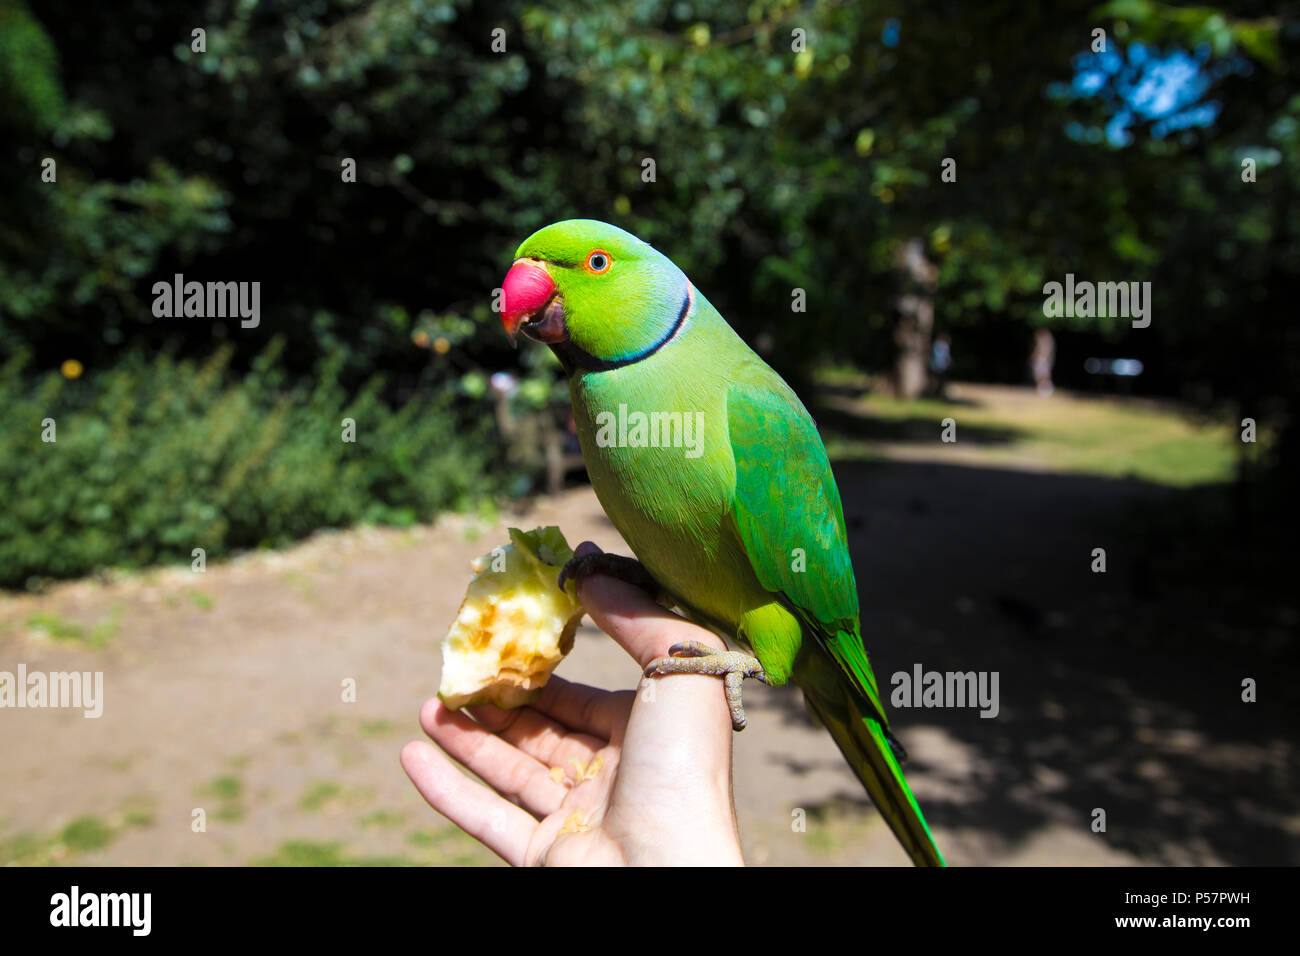 A tame rose-ringed parakeet sitting on a person's hand eating an apple in Hyde Park, London, UK Stock Photo